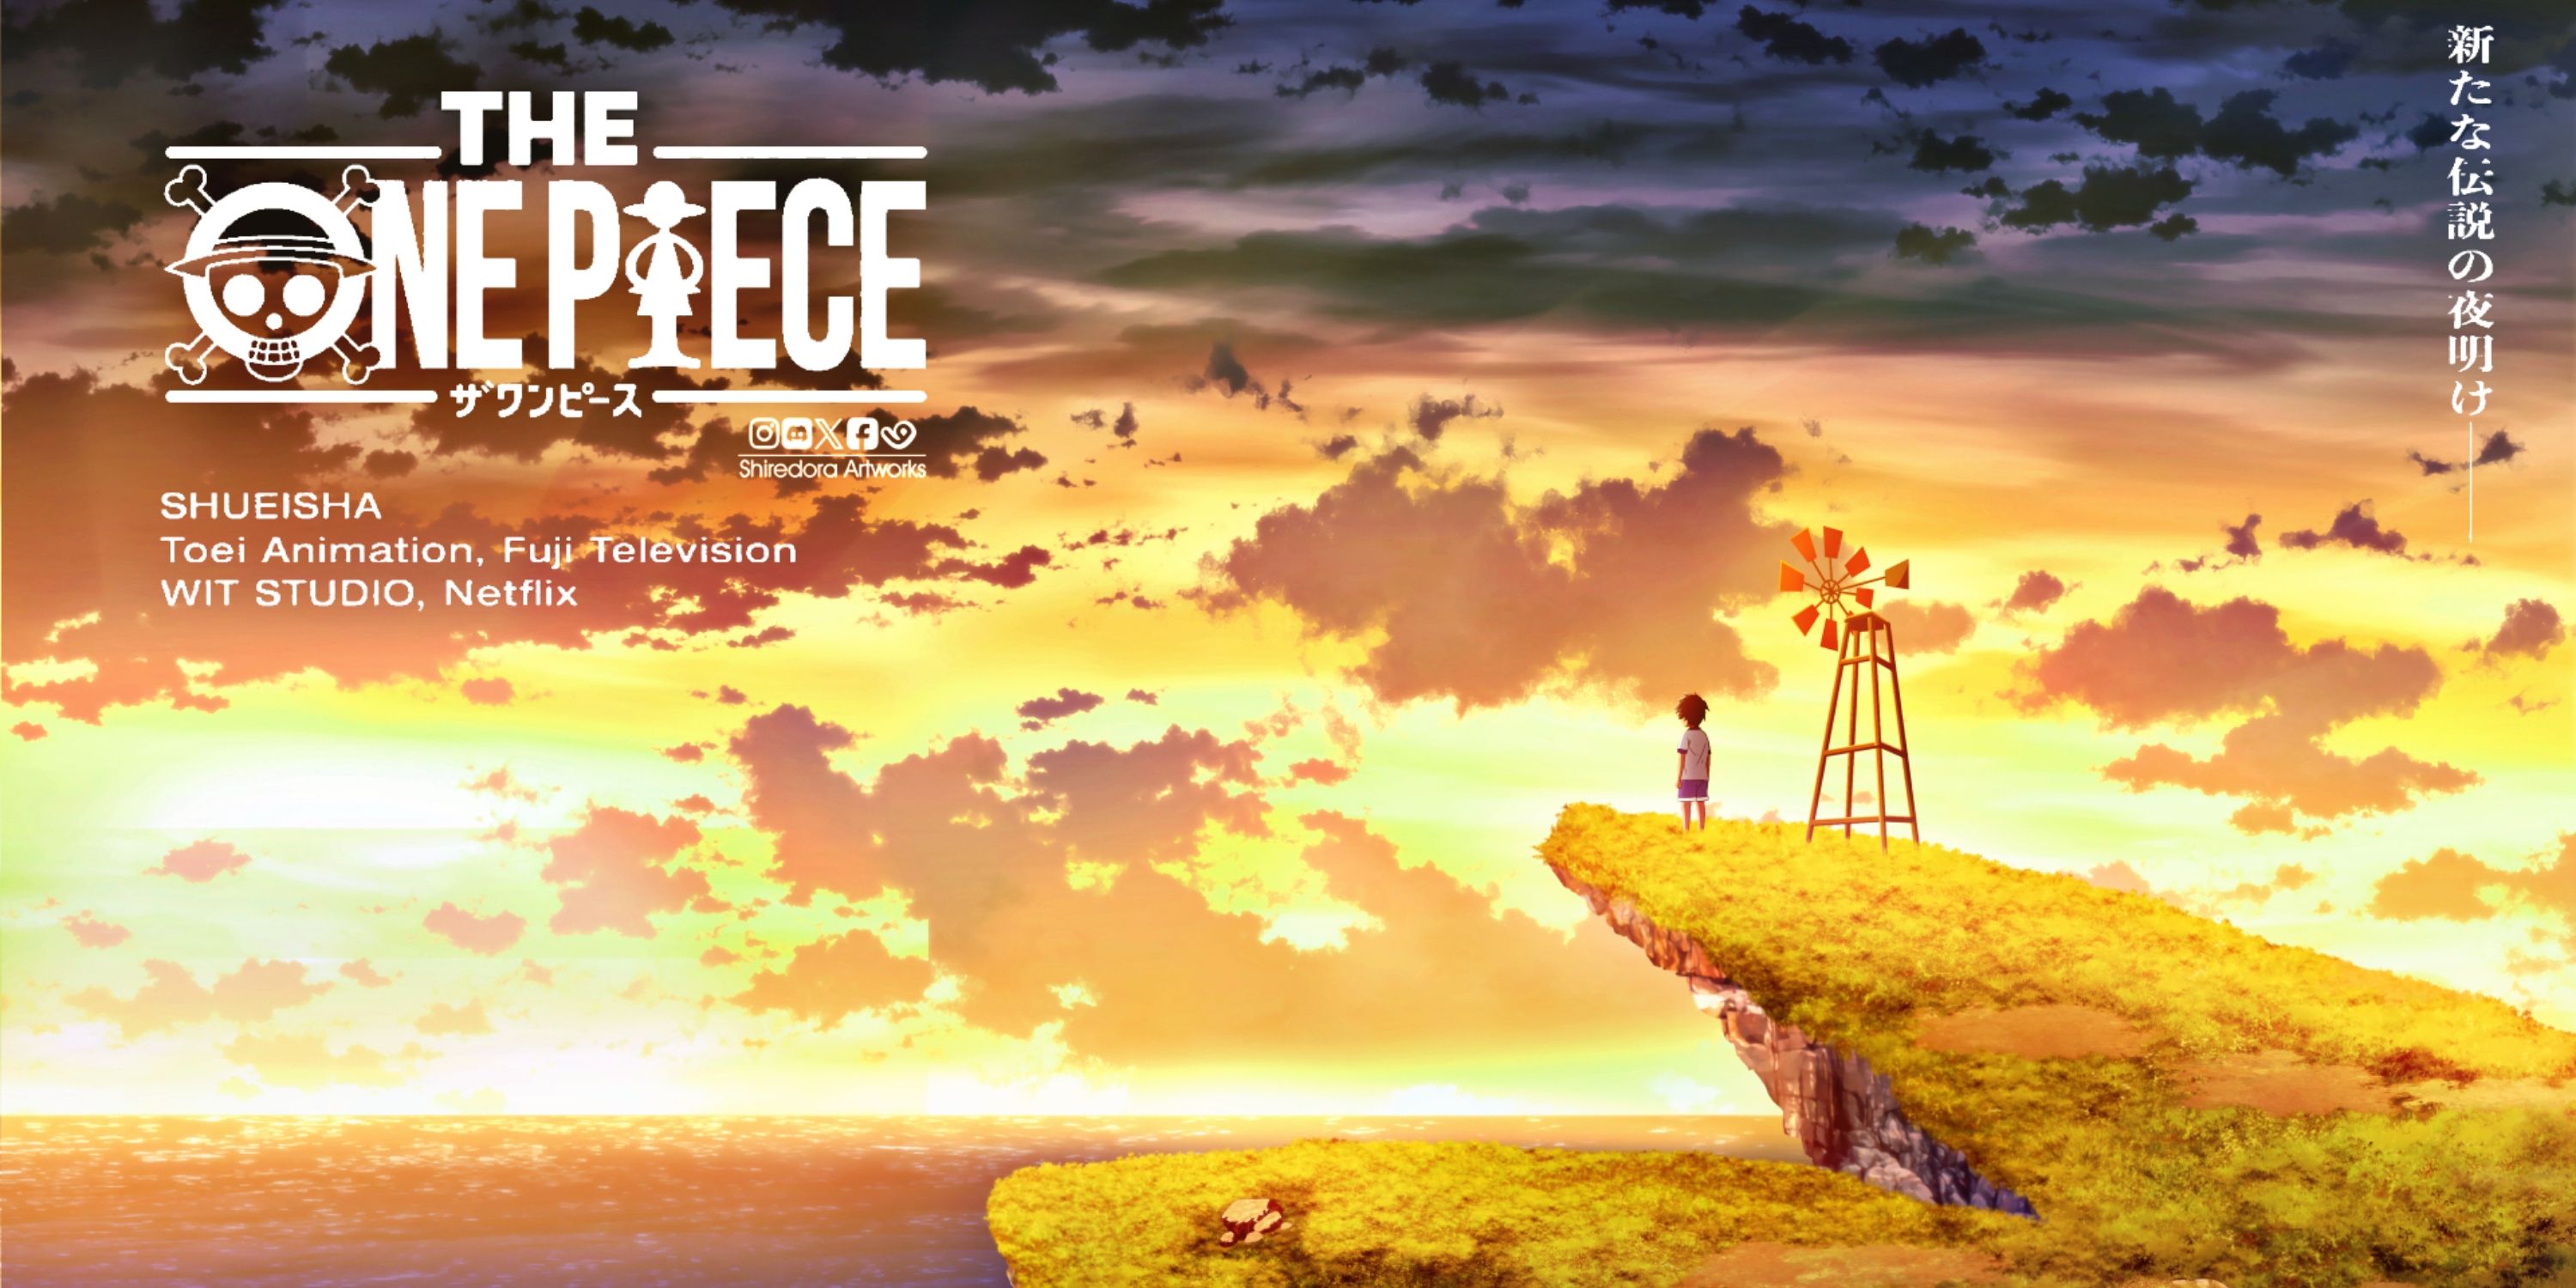 New One Piece Anime Studio Teases The Remake Will Be Different